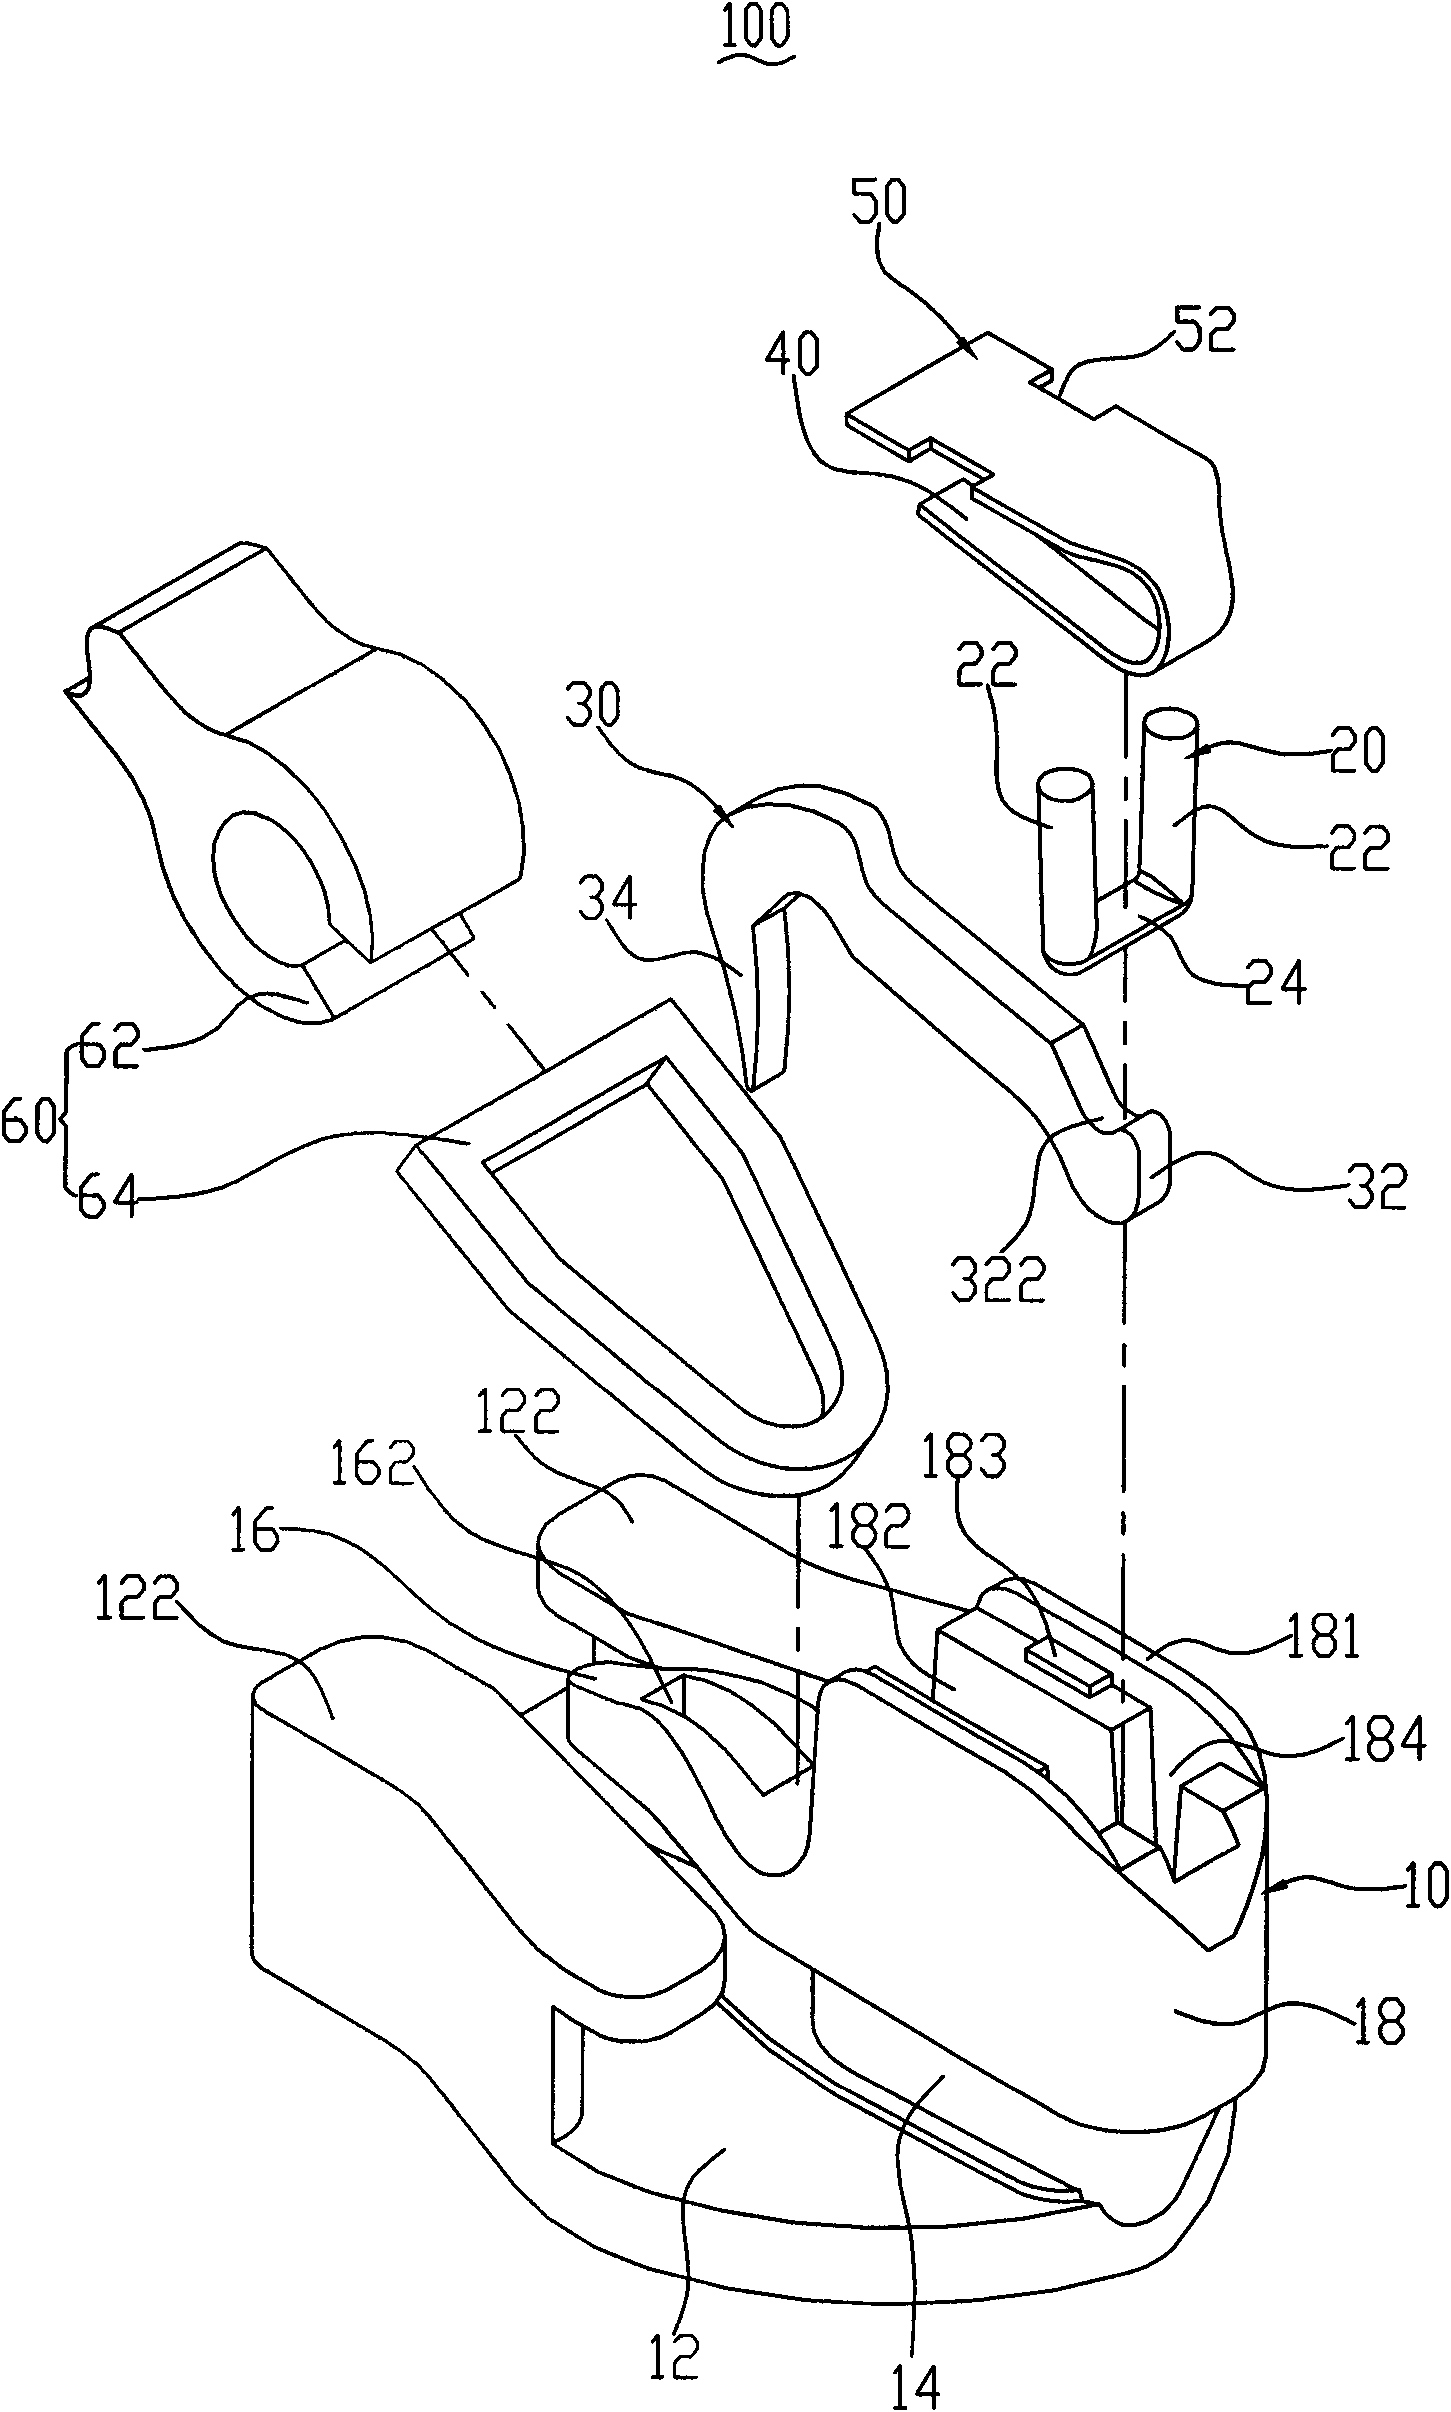 Self-locking invisible puller